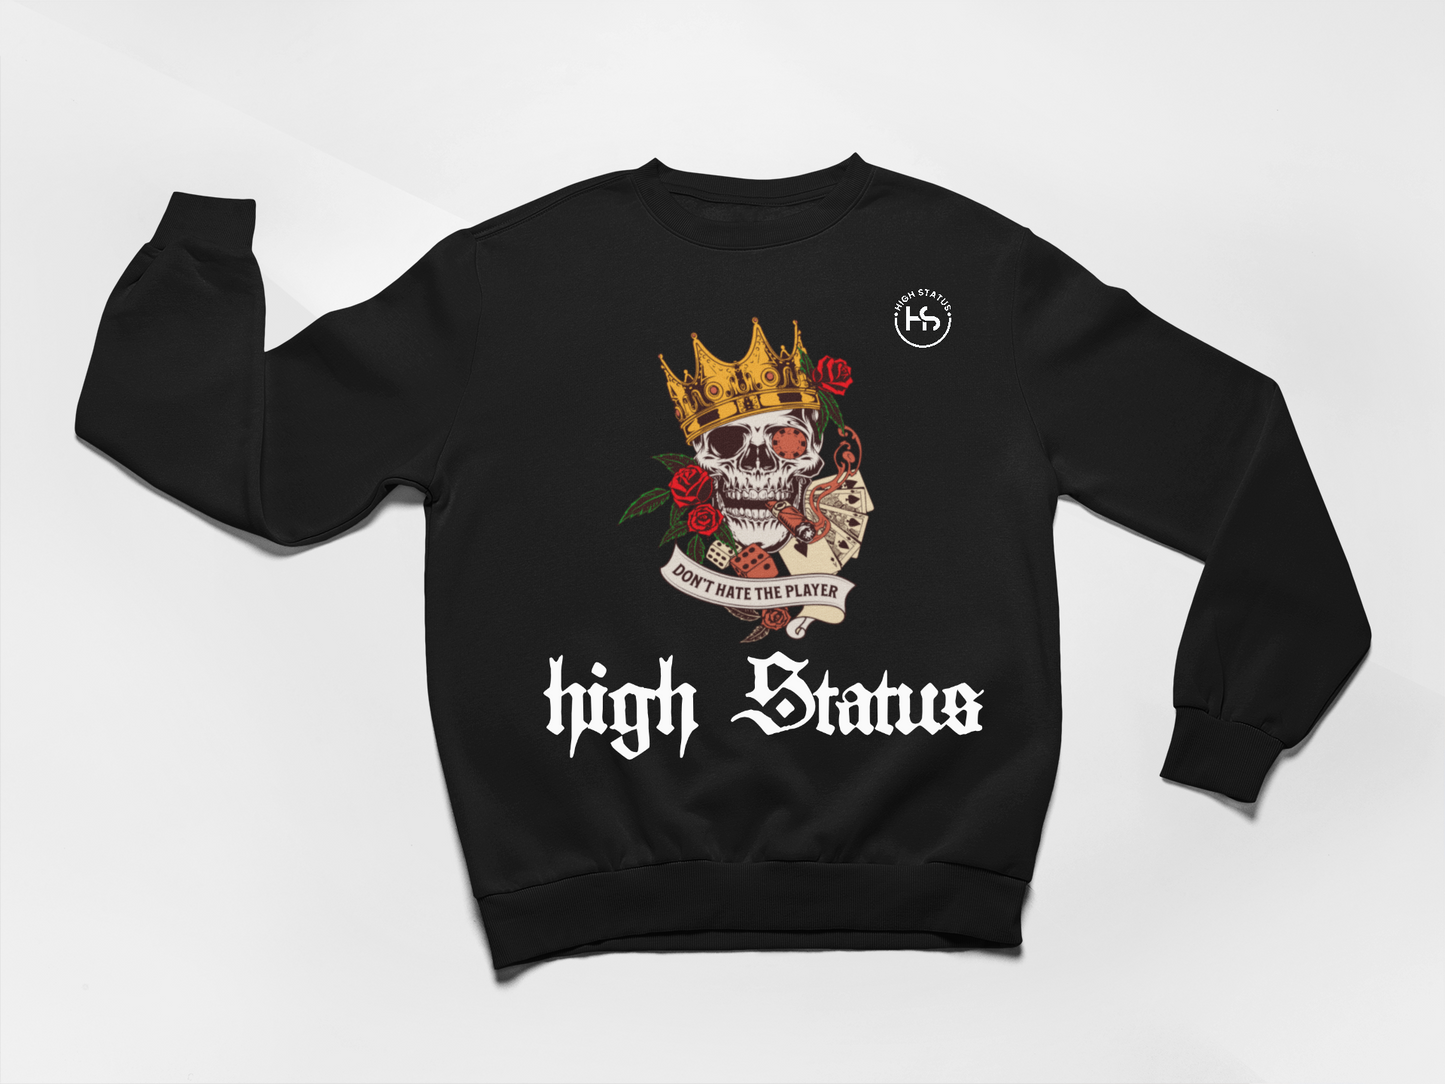 HIGH STATUS "DON'T HATE THE PLAYER" BLACK SWEATER